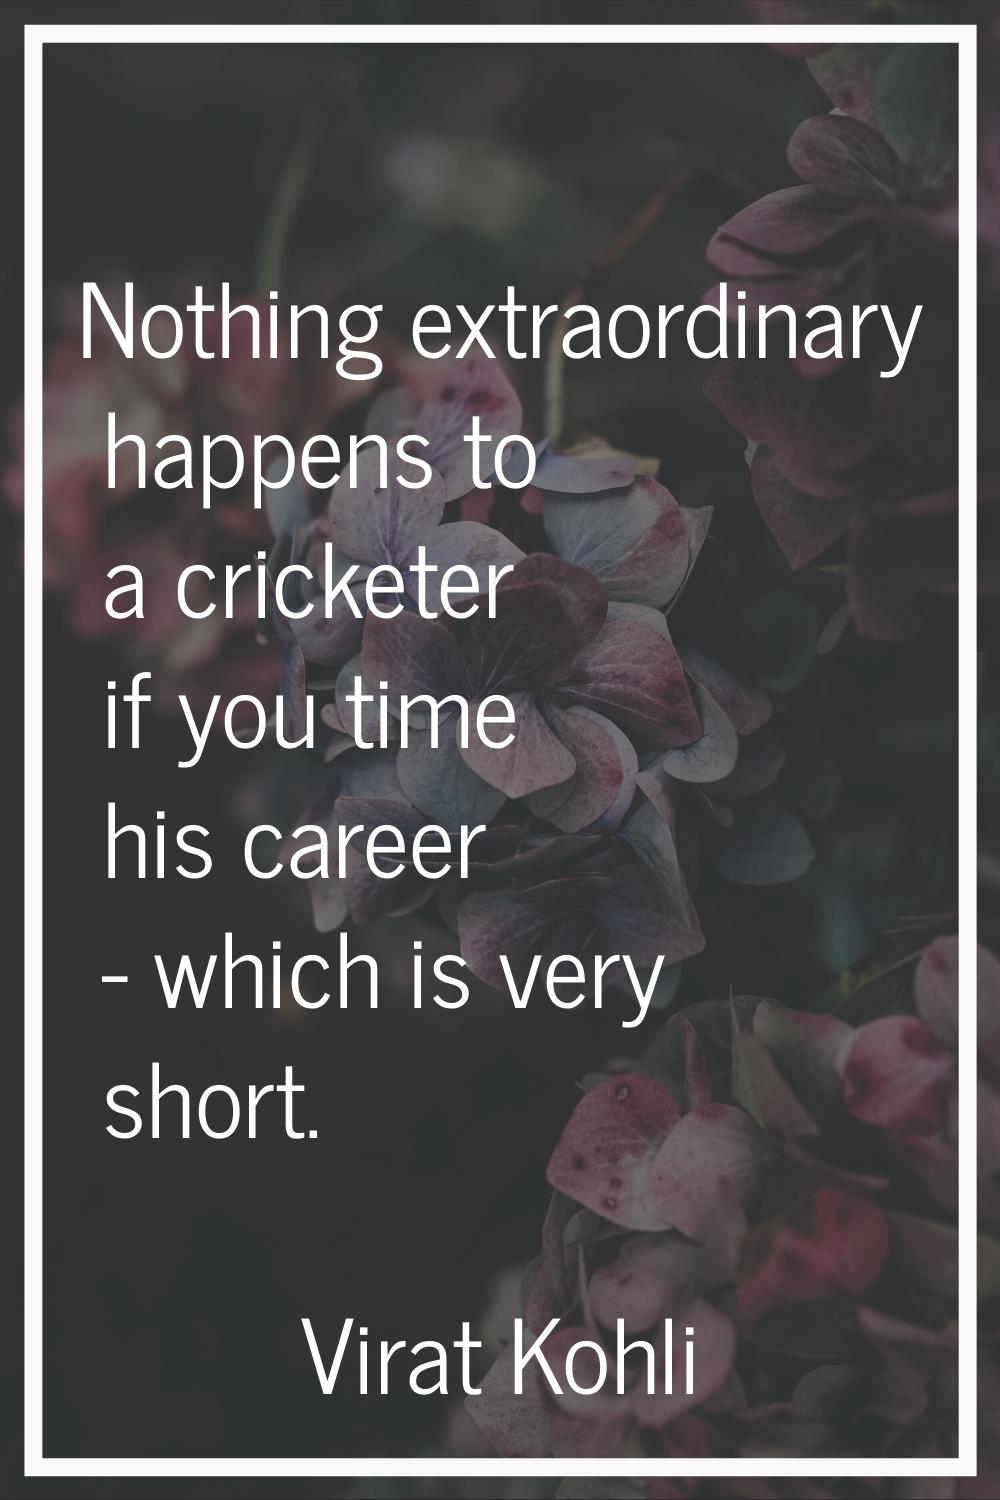 Nothing extraordinary happens to a cricketer if you time his career - which is very short.